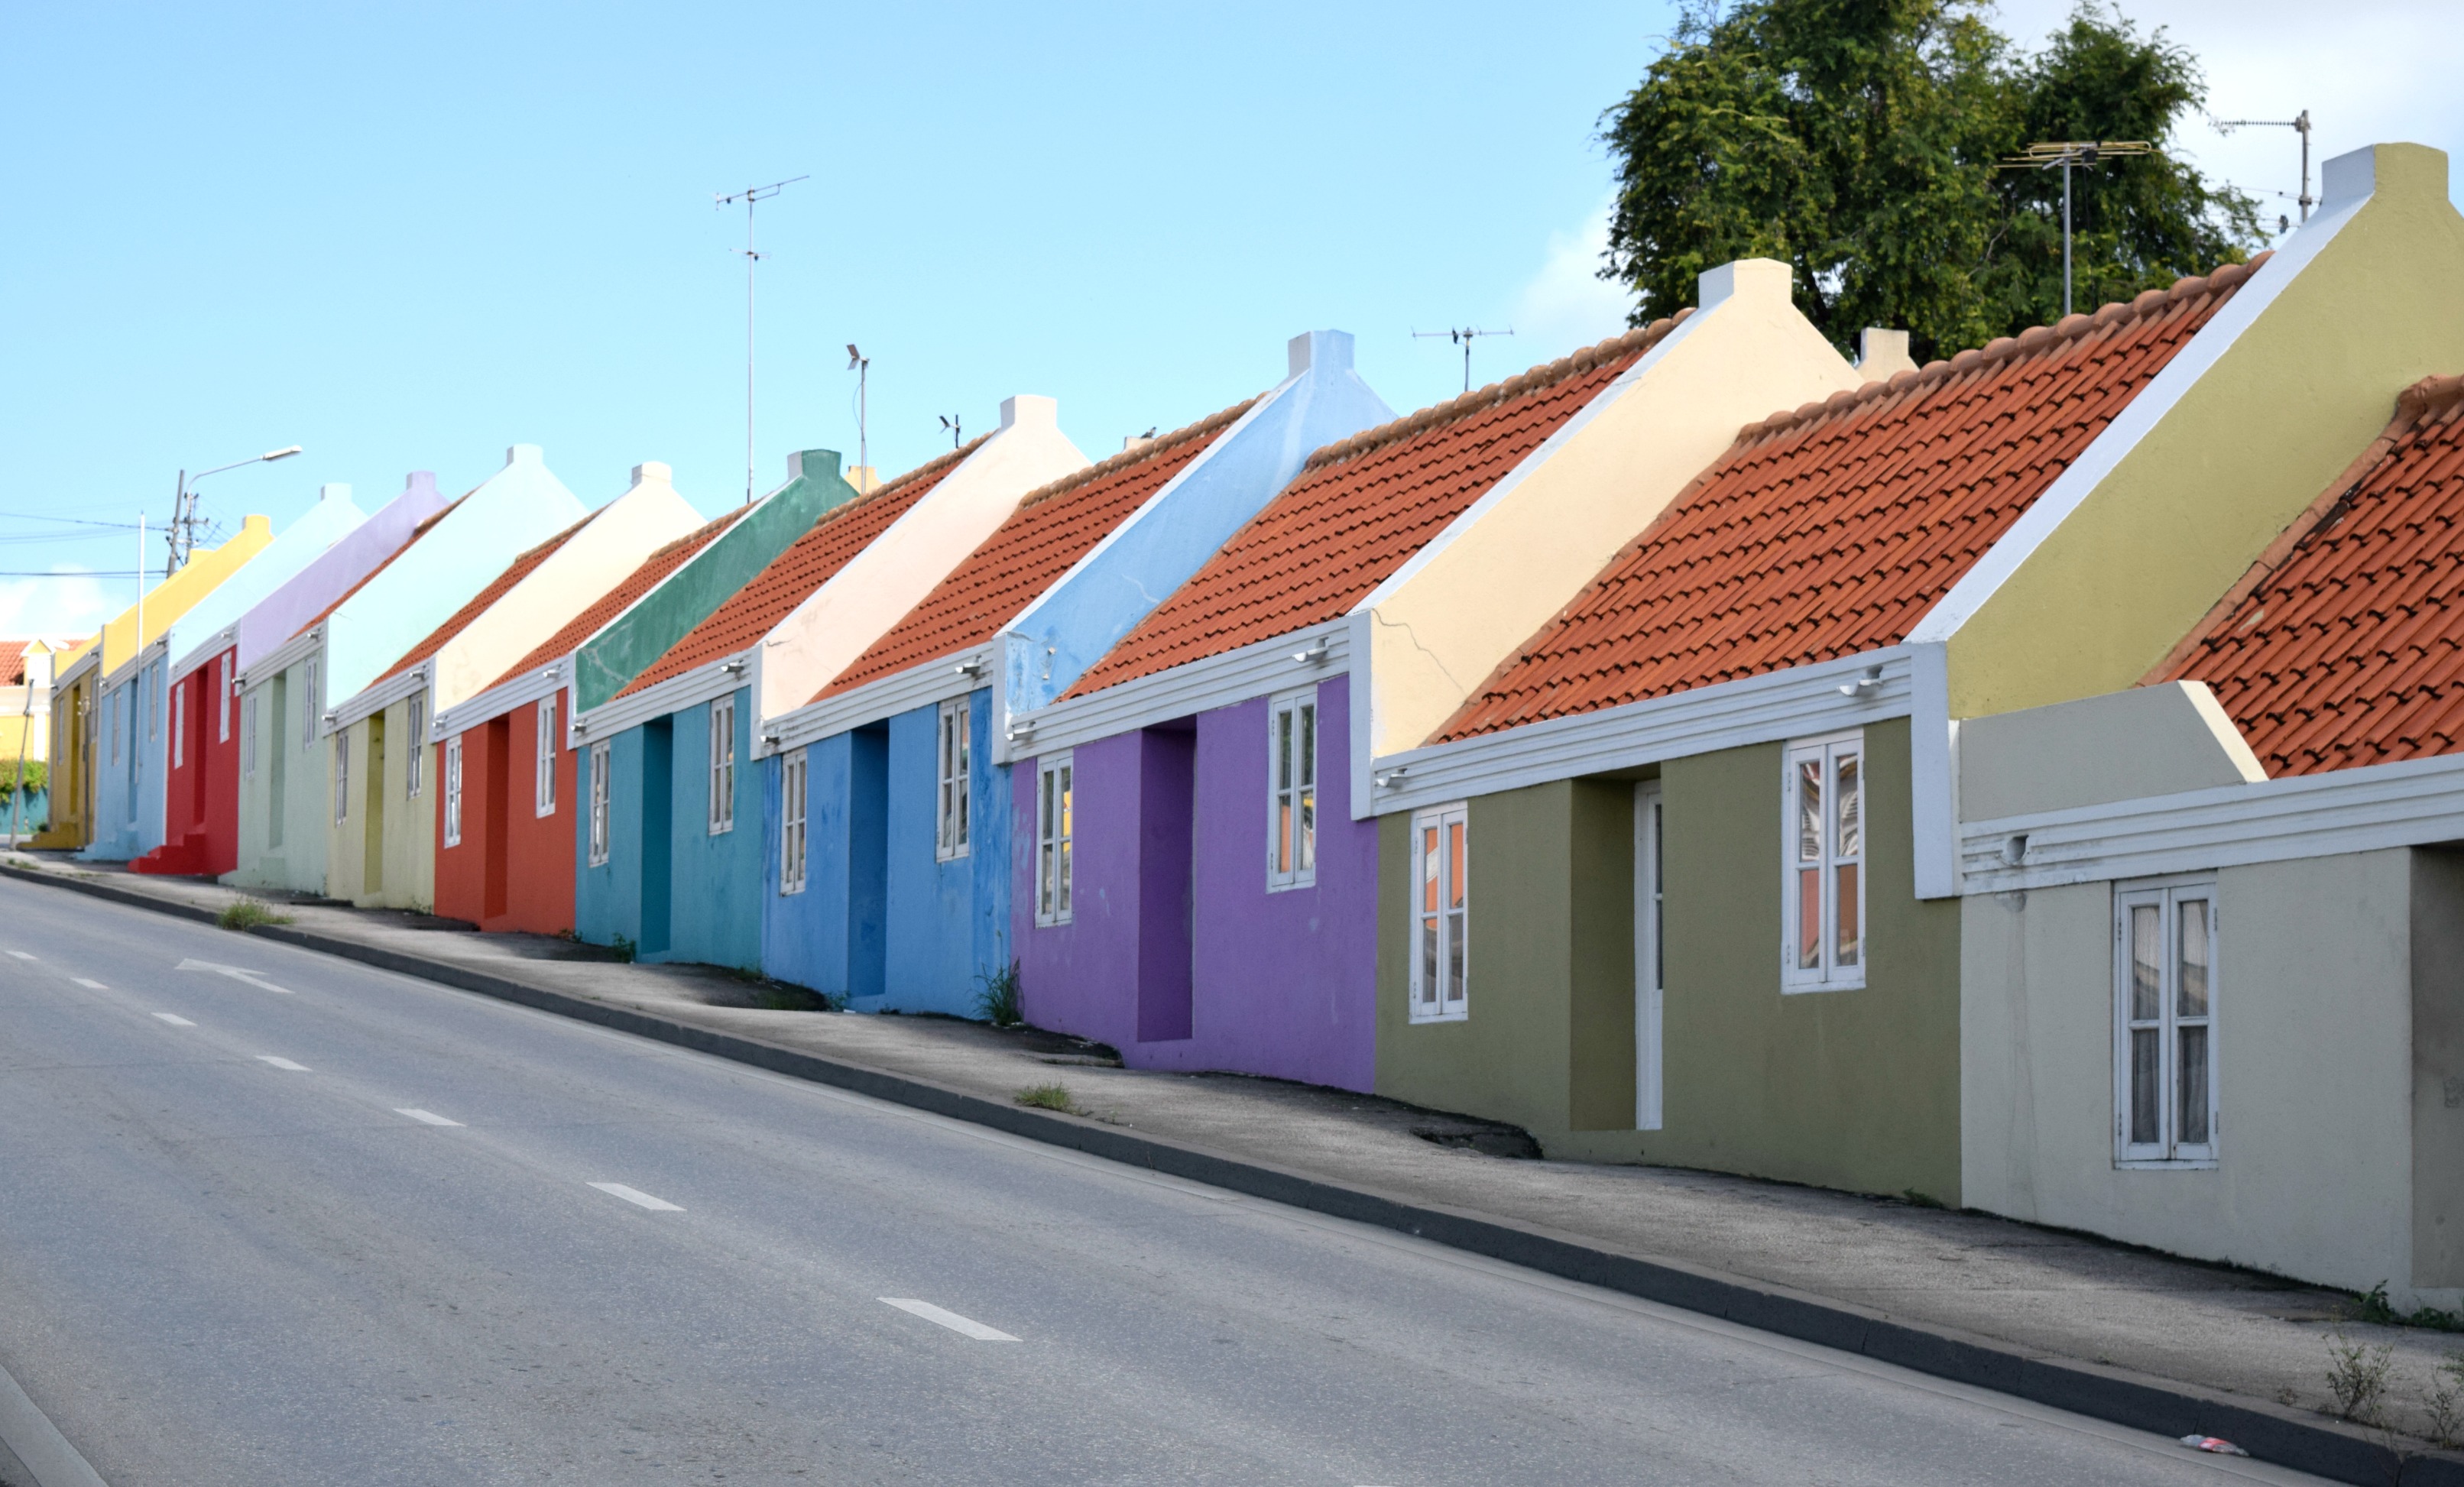 vibrant-colors-willemstad-curacao-16